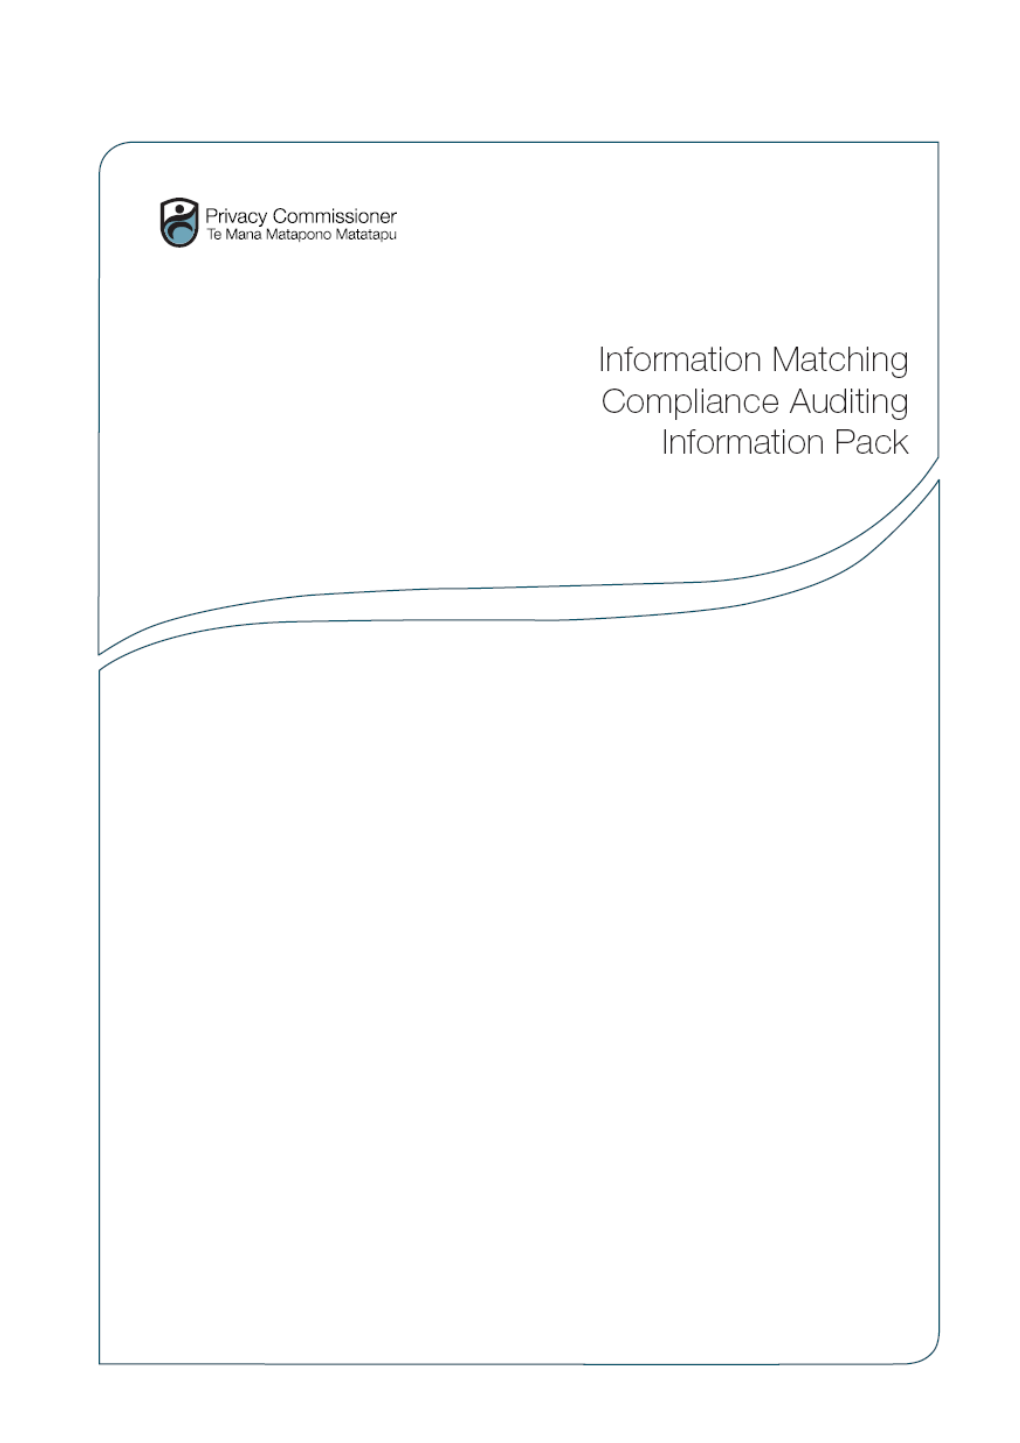 Information Matching Audit - Background and Guidelines